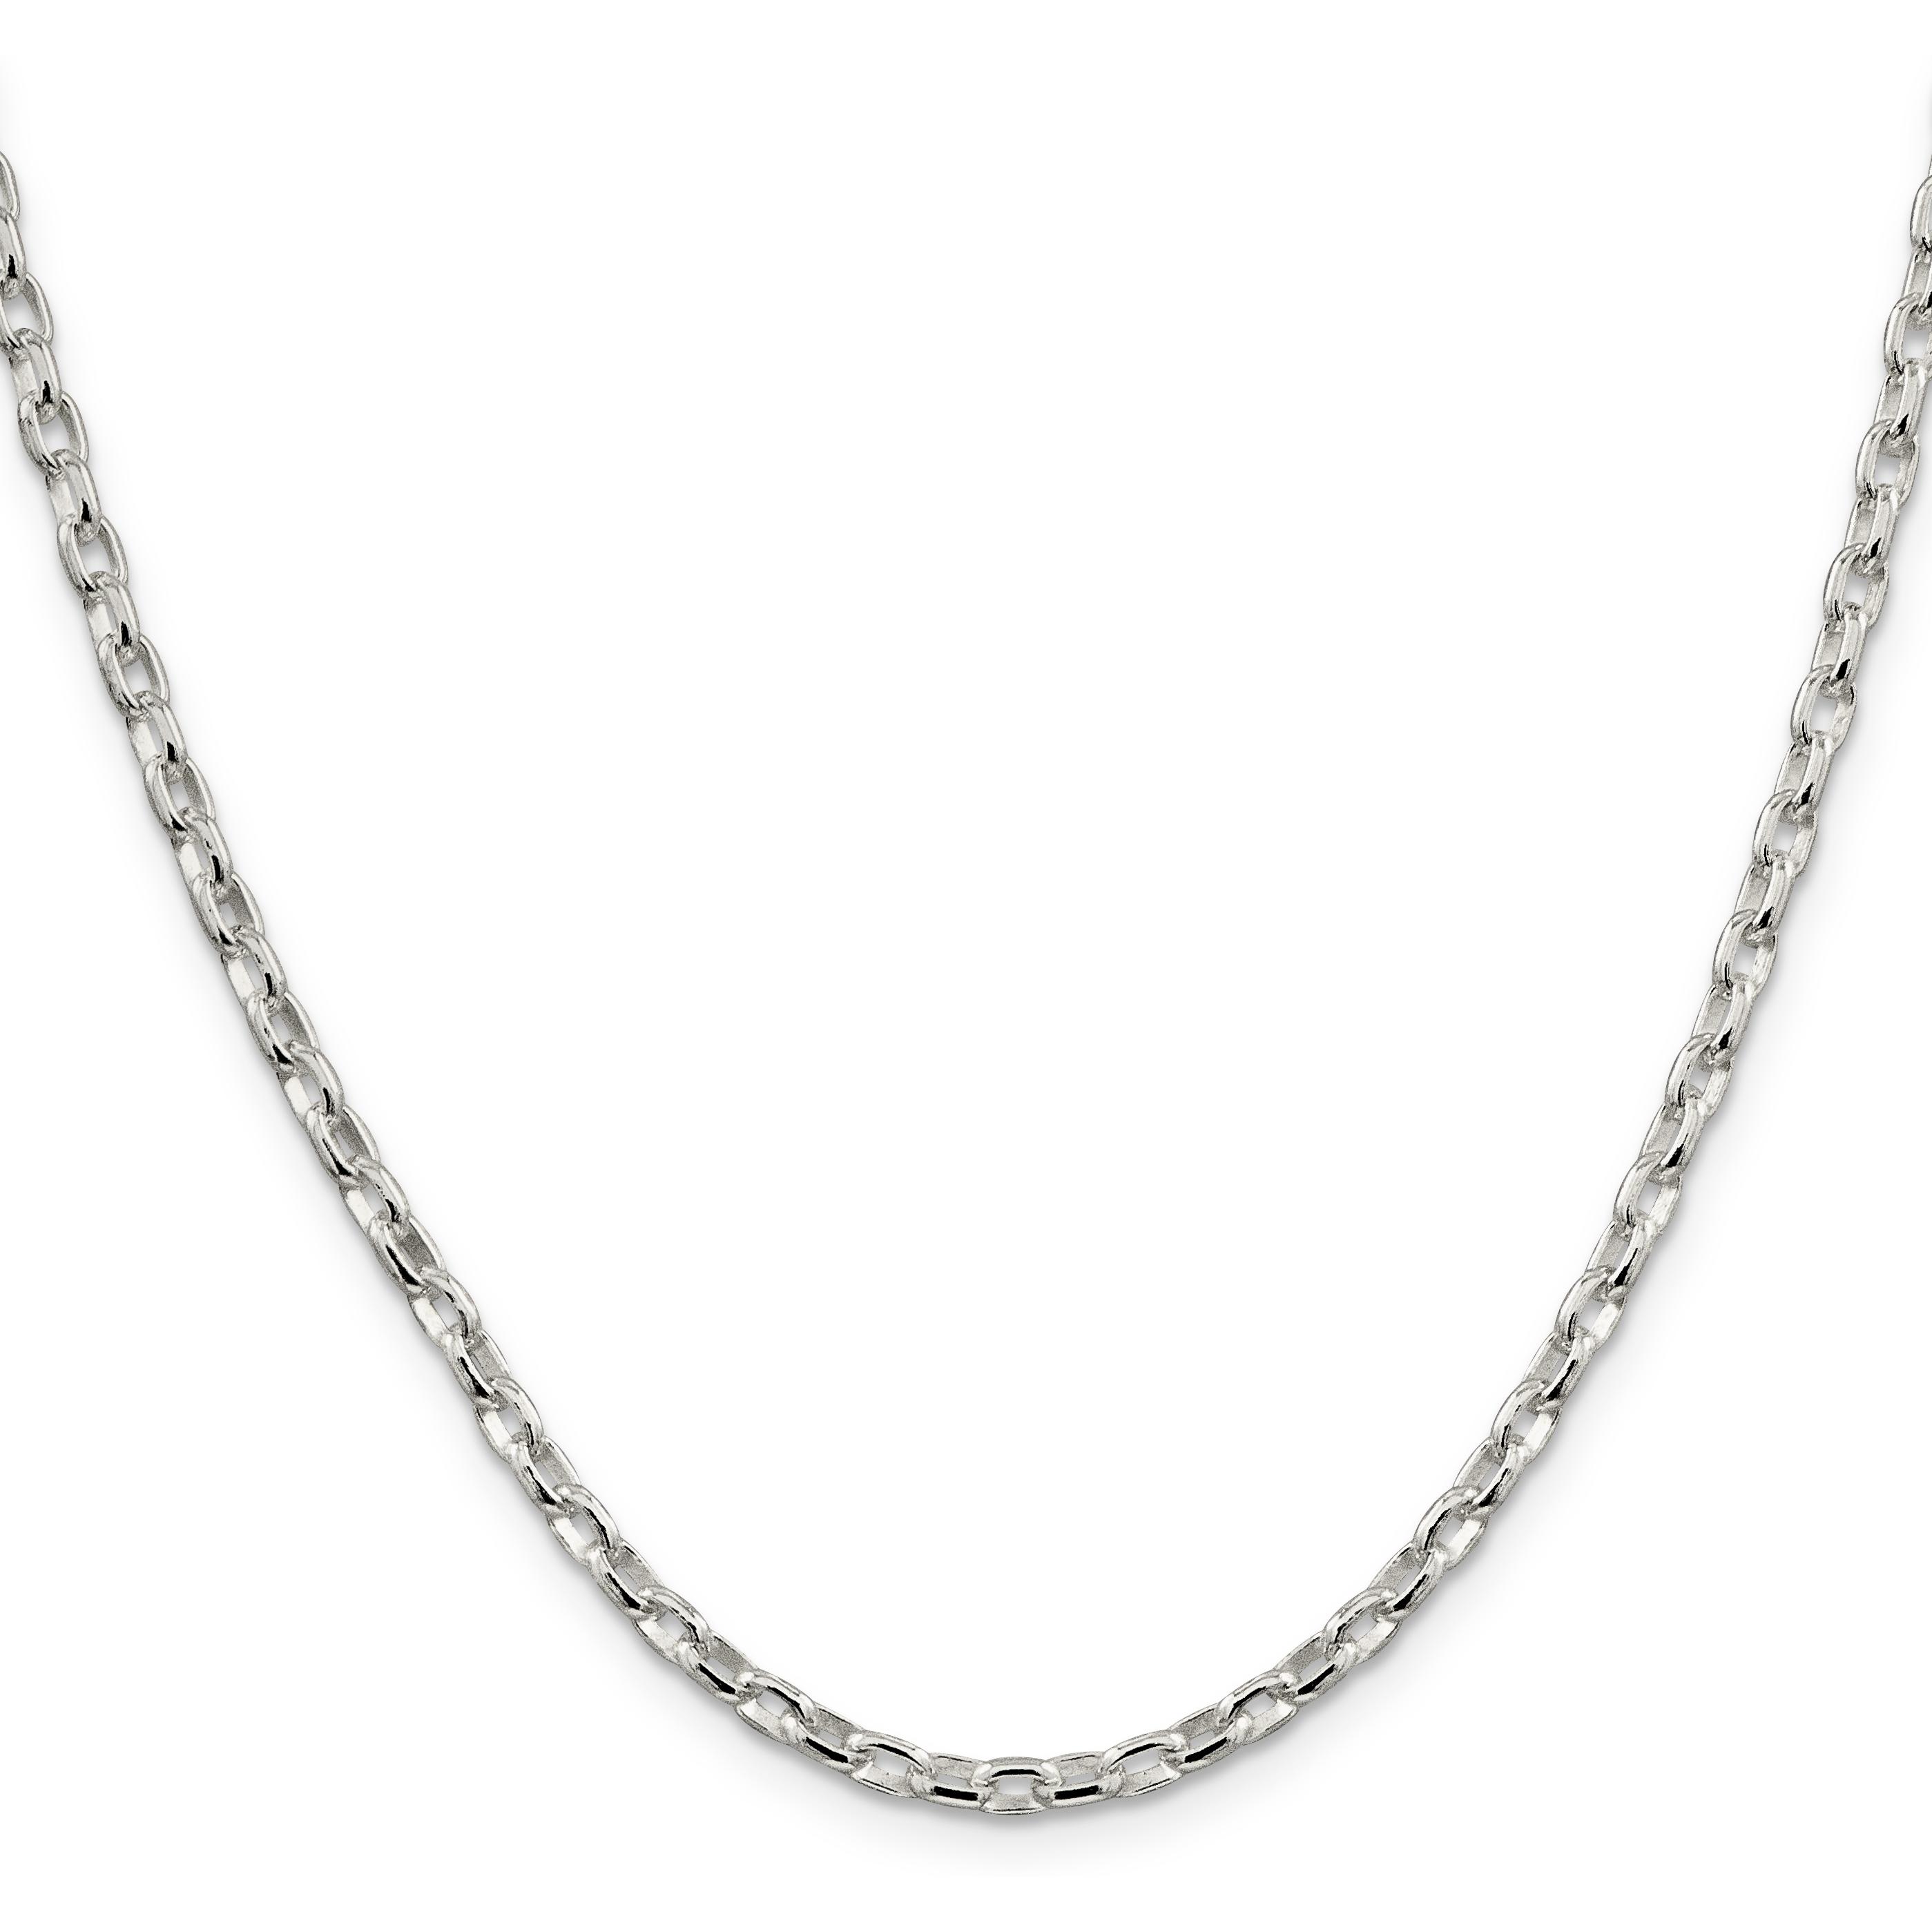 Findingking Sterling Silver Oval Rolo Chain 16"